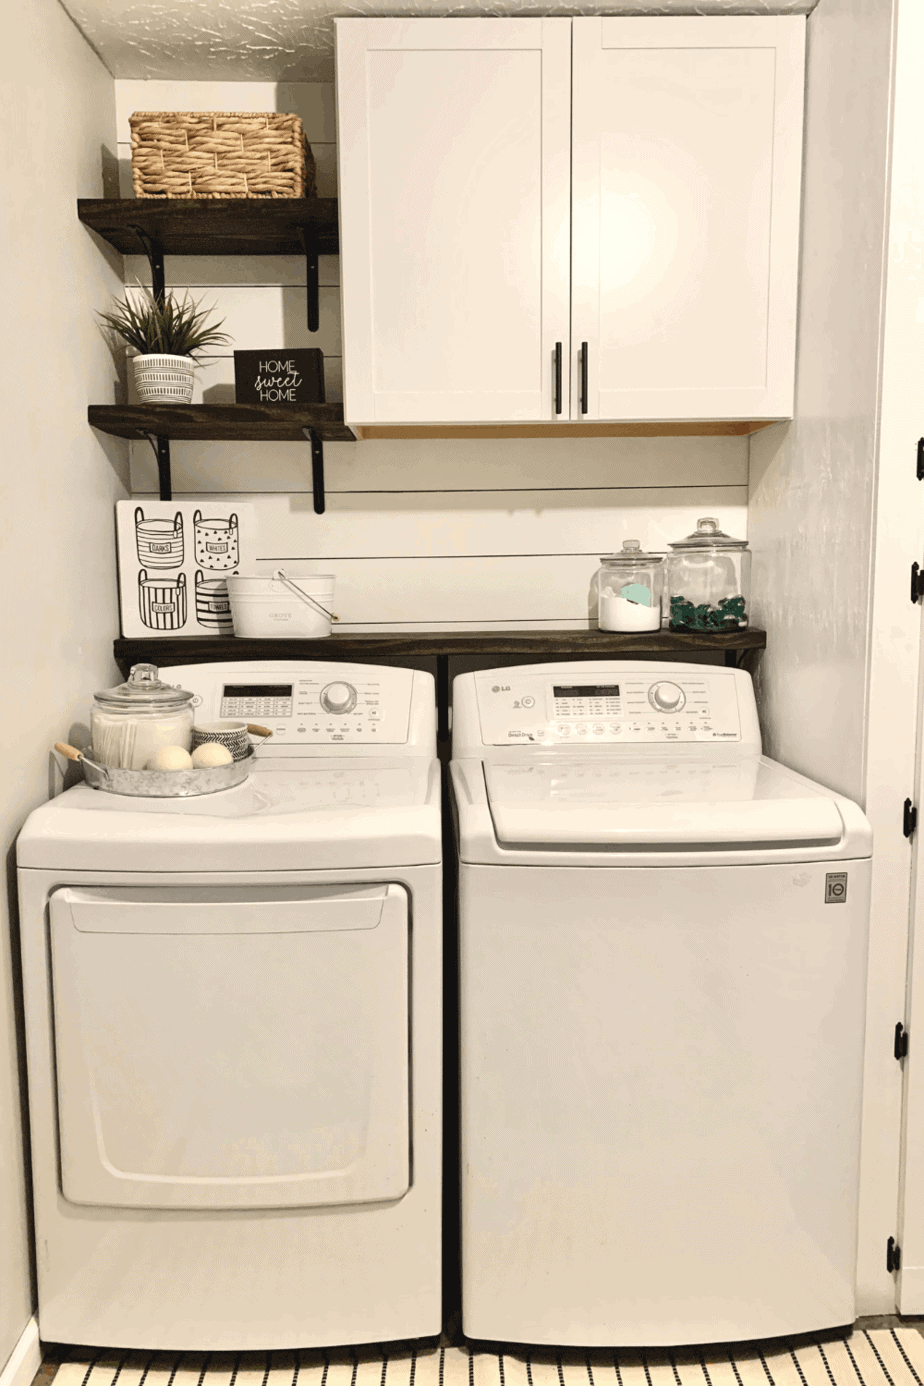 Laundry Room Checklist: What You Need for Your New Home